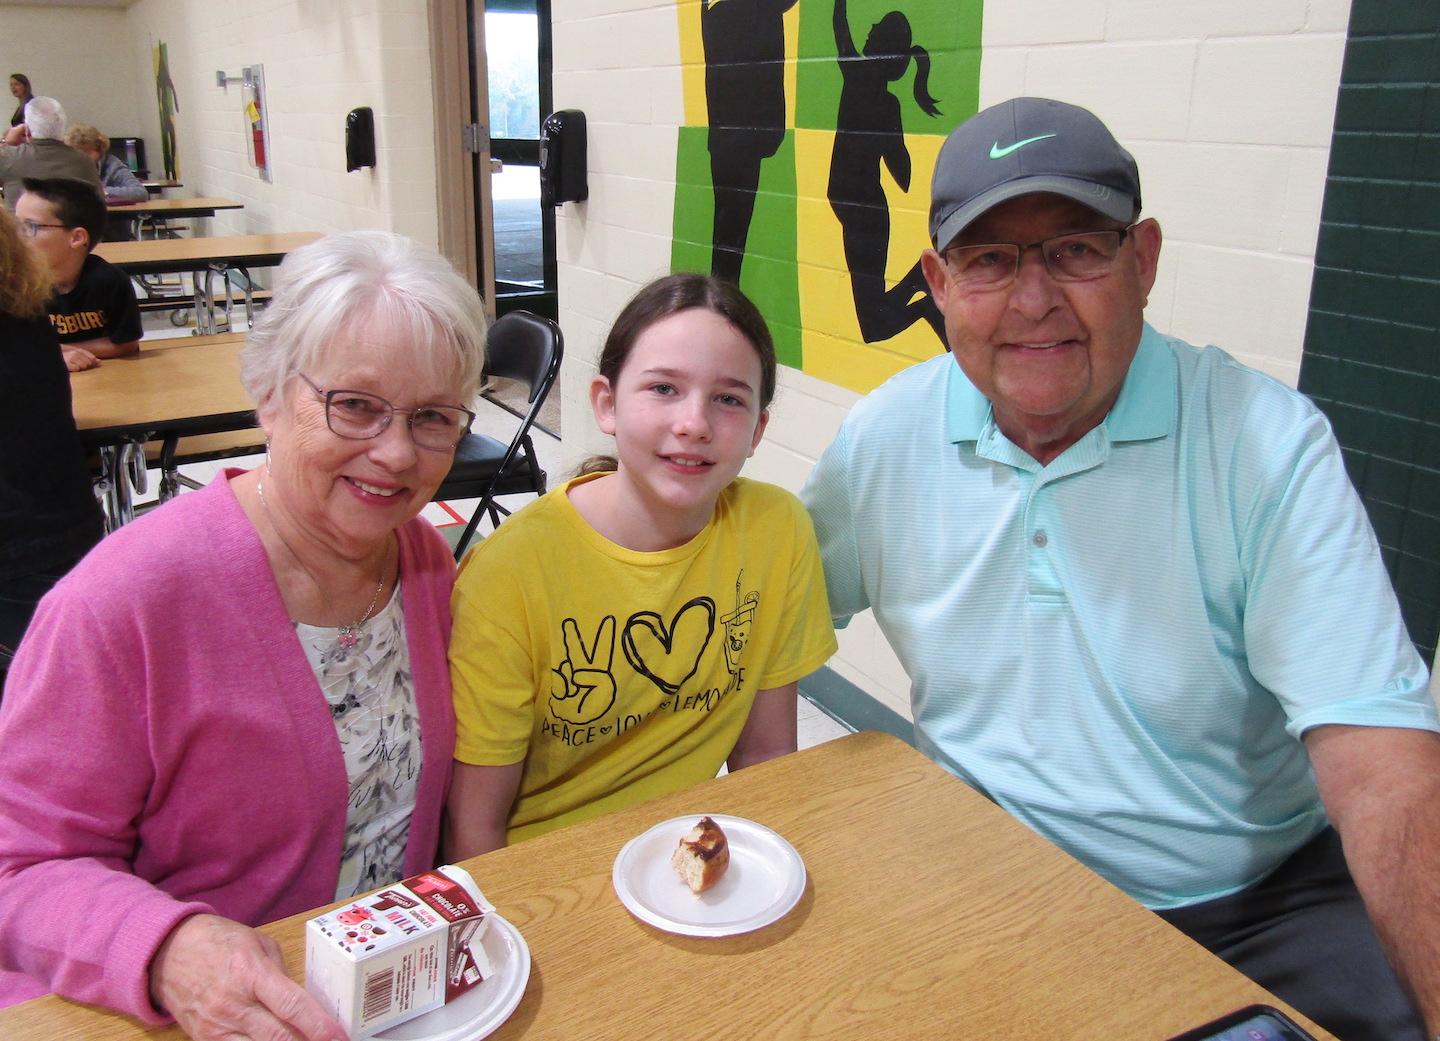 Fiona Plechey, fifth grade, and her grandparents spend quality time together during the breakfast